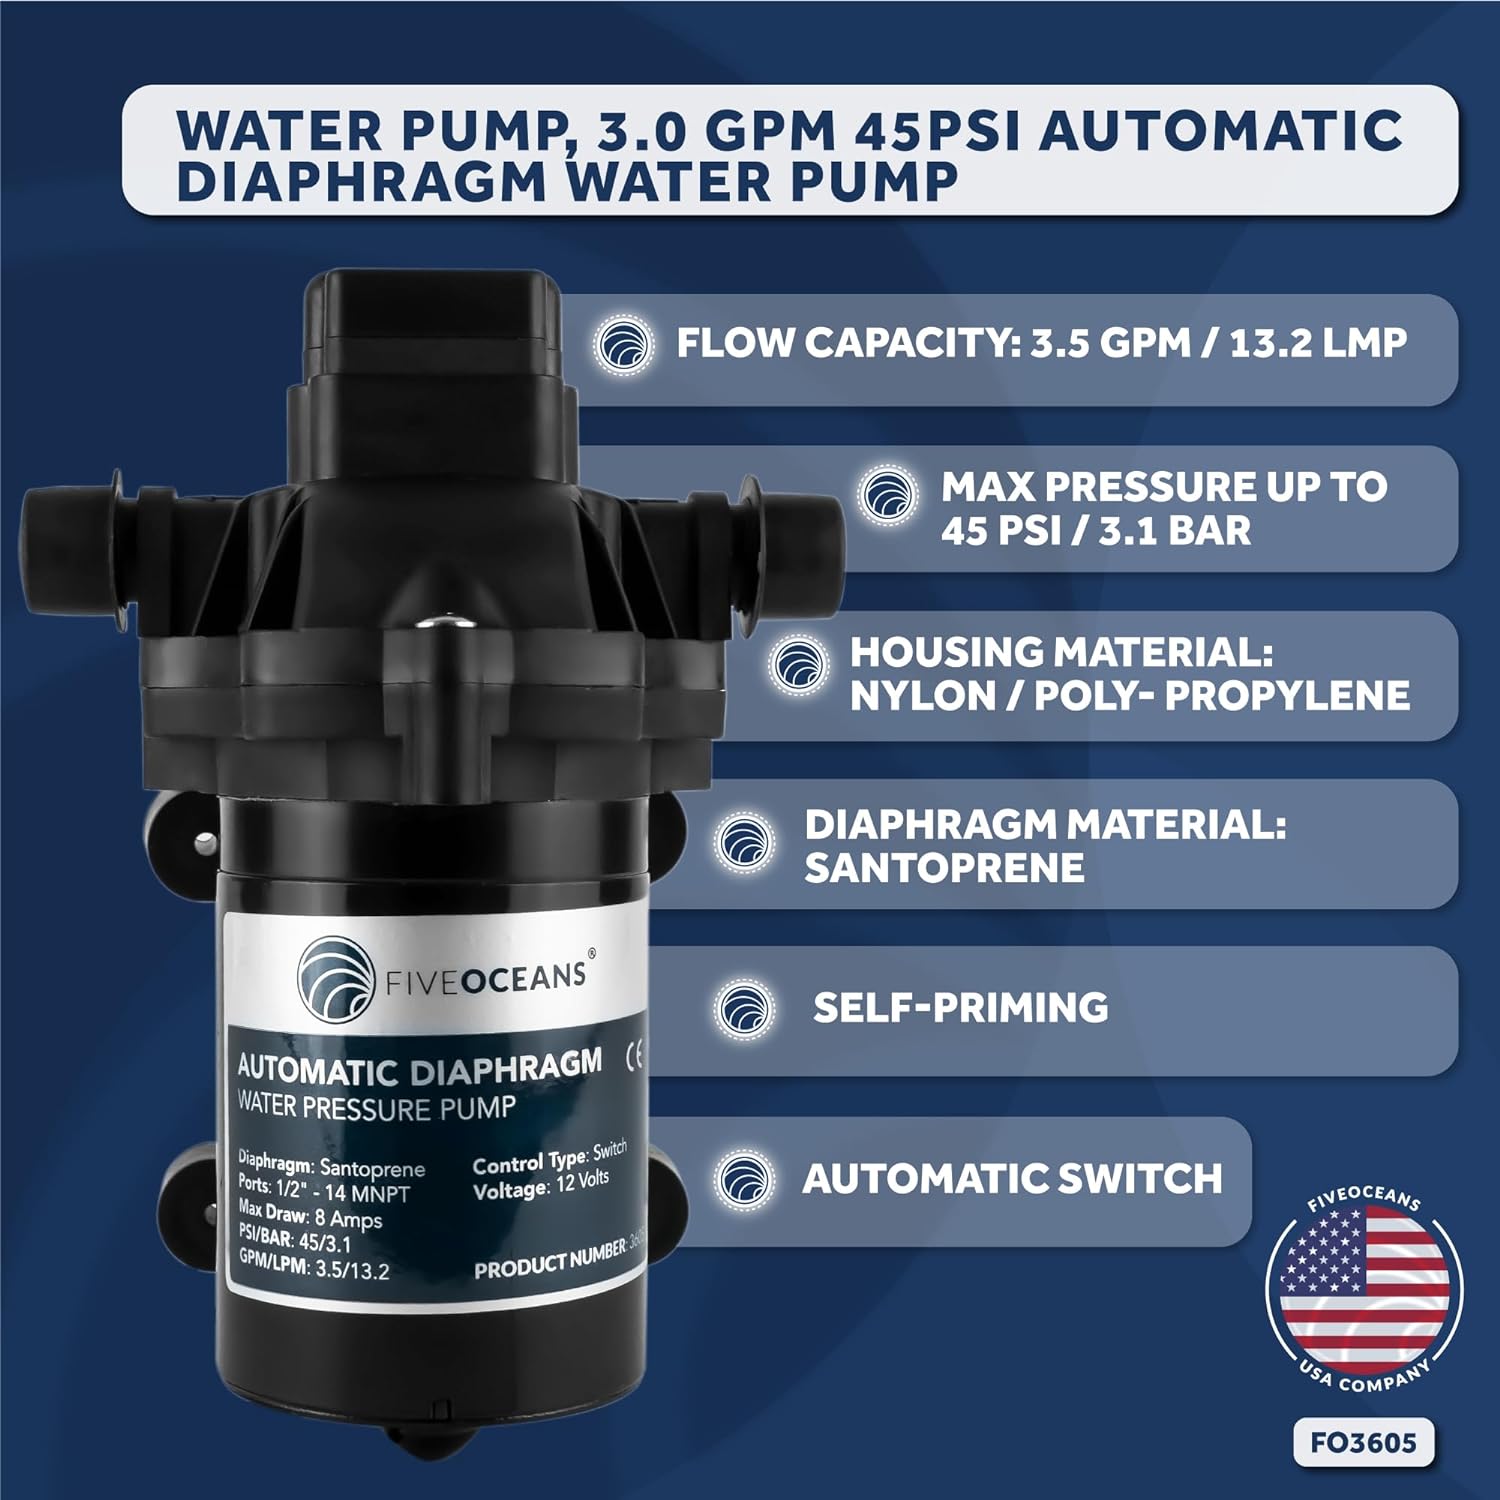 12 volts Automatic Diaphragm Water Pressure Pump, Up to 45PSI / 3.0 GPM, Self-Priming, Run Dry Safe - 0